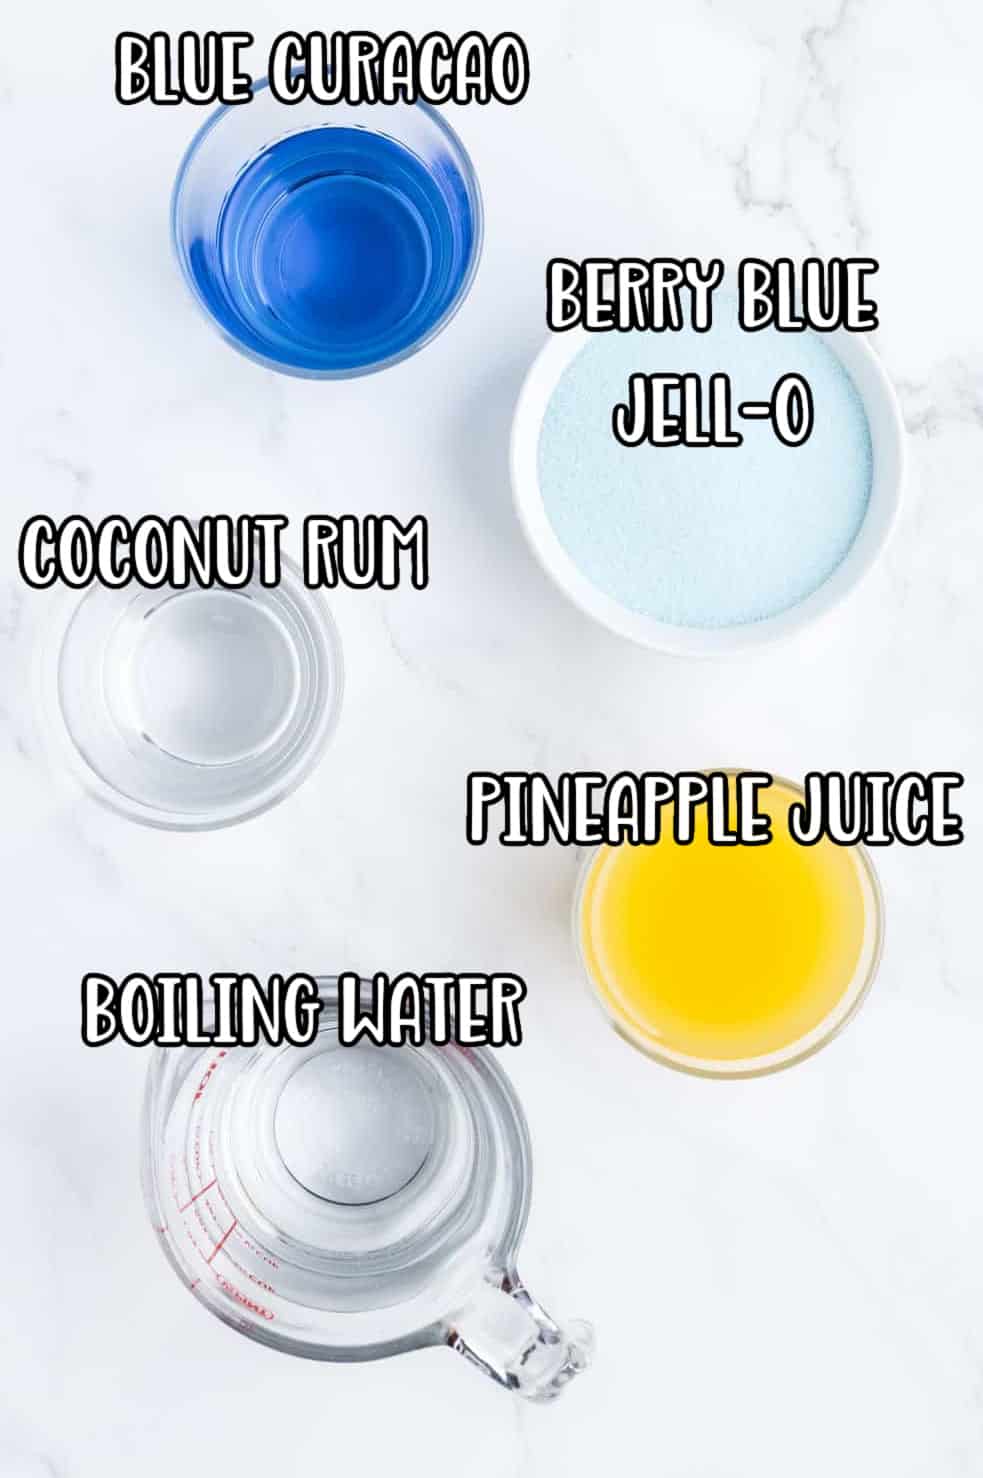 Berry Blue Jello Mix, water, coconut rum, pineapple juice, and blue curaçao.